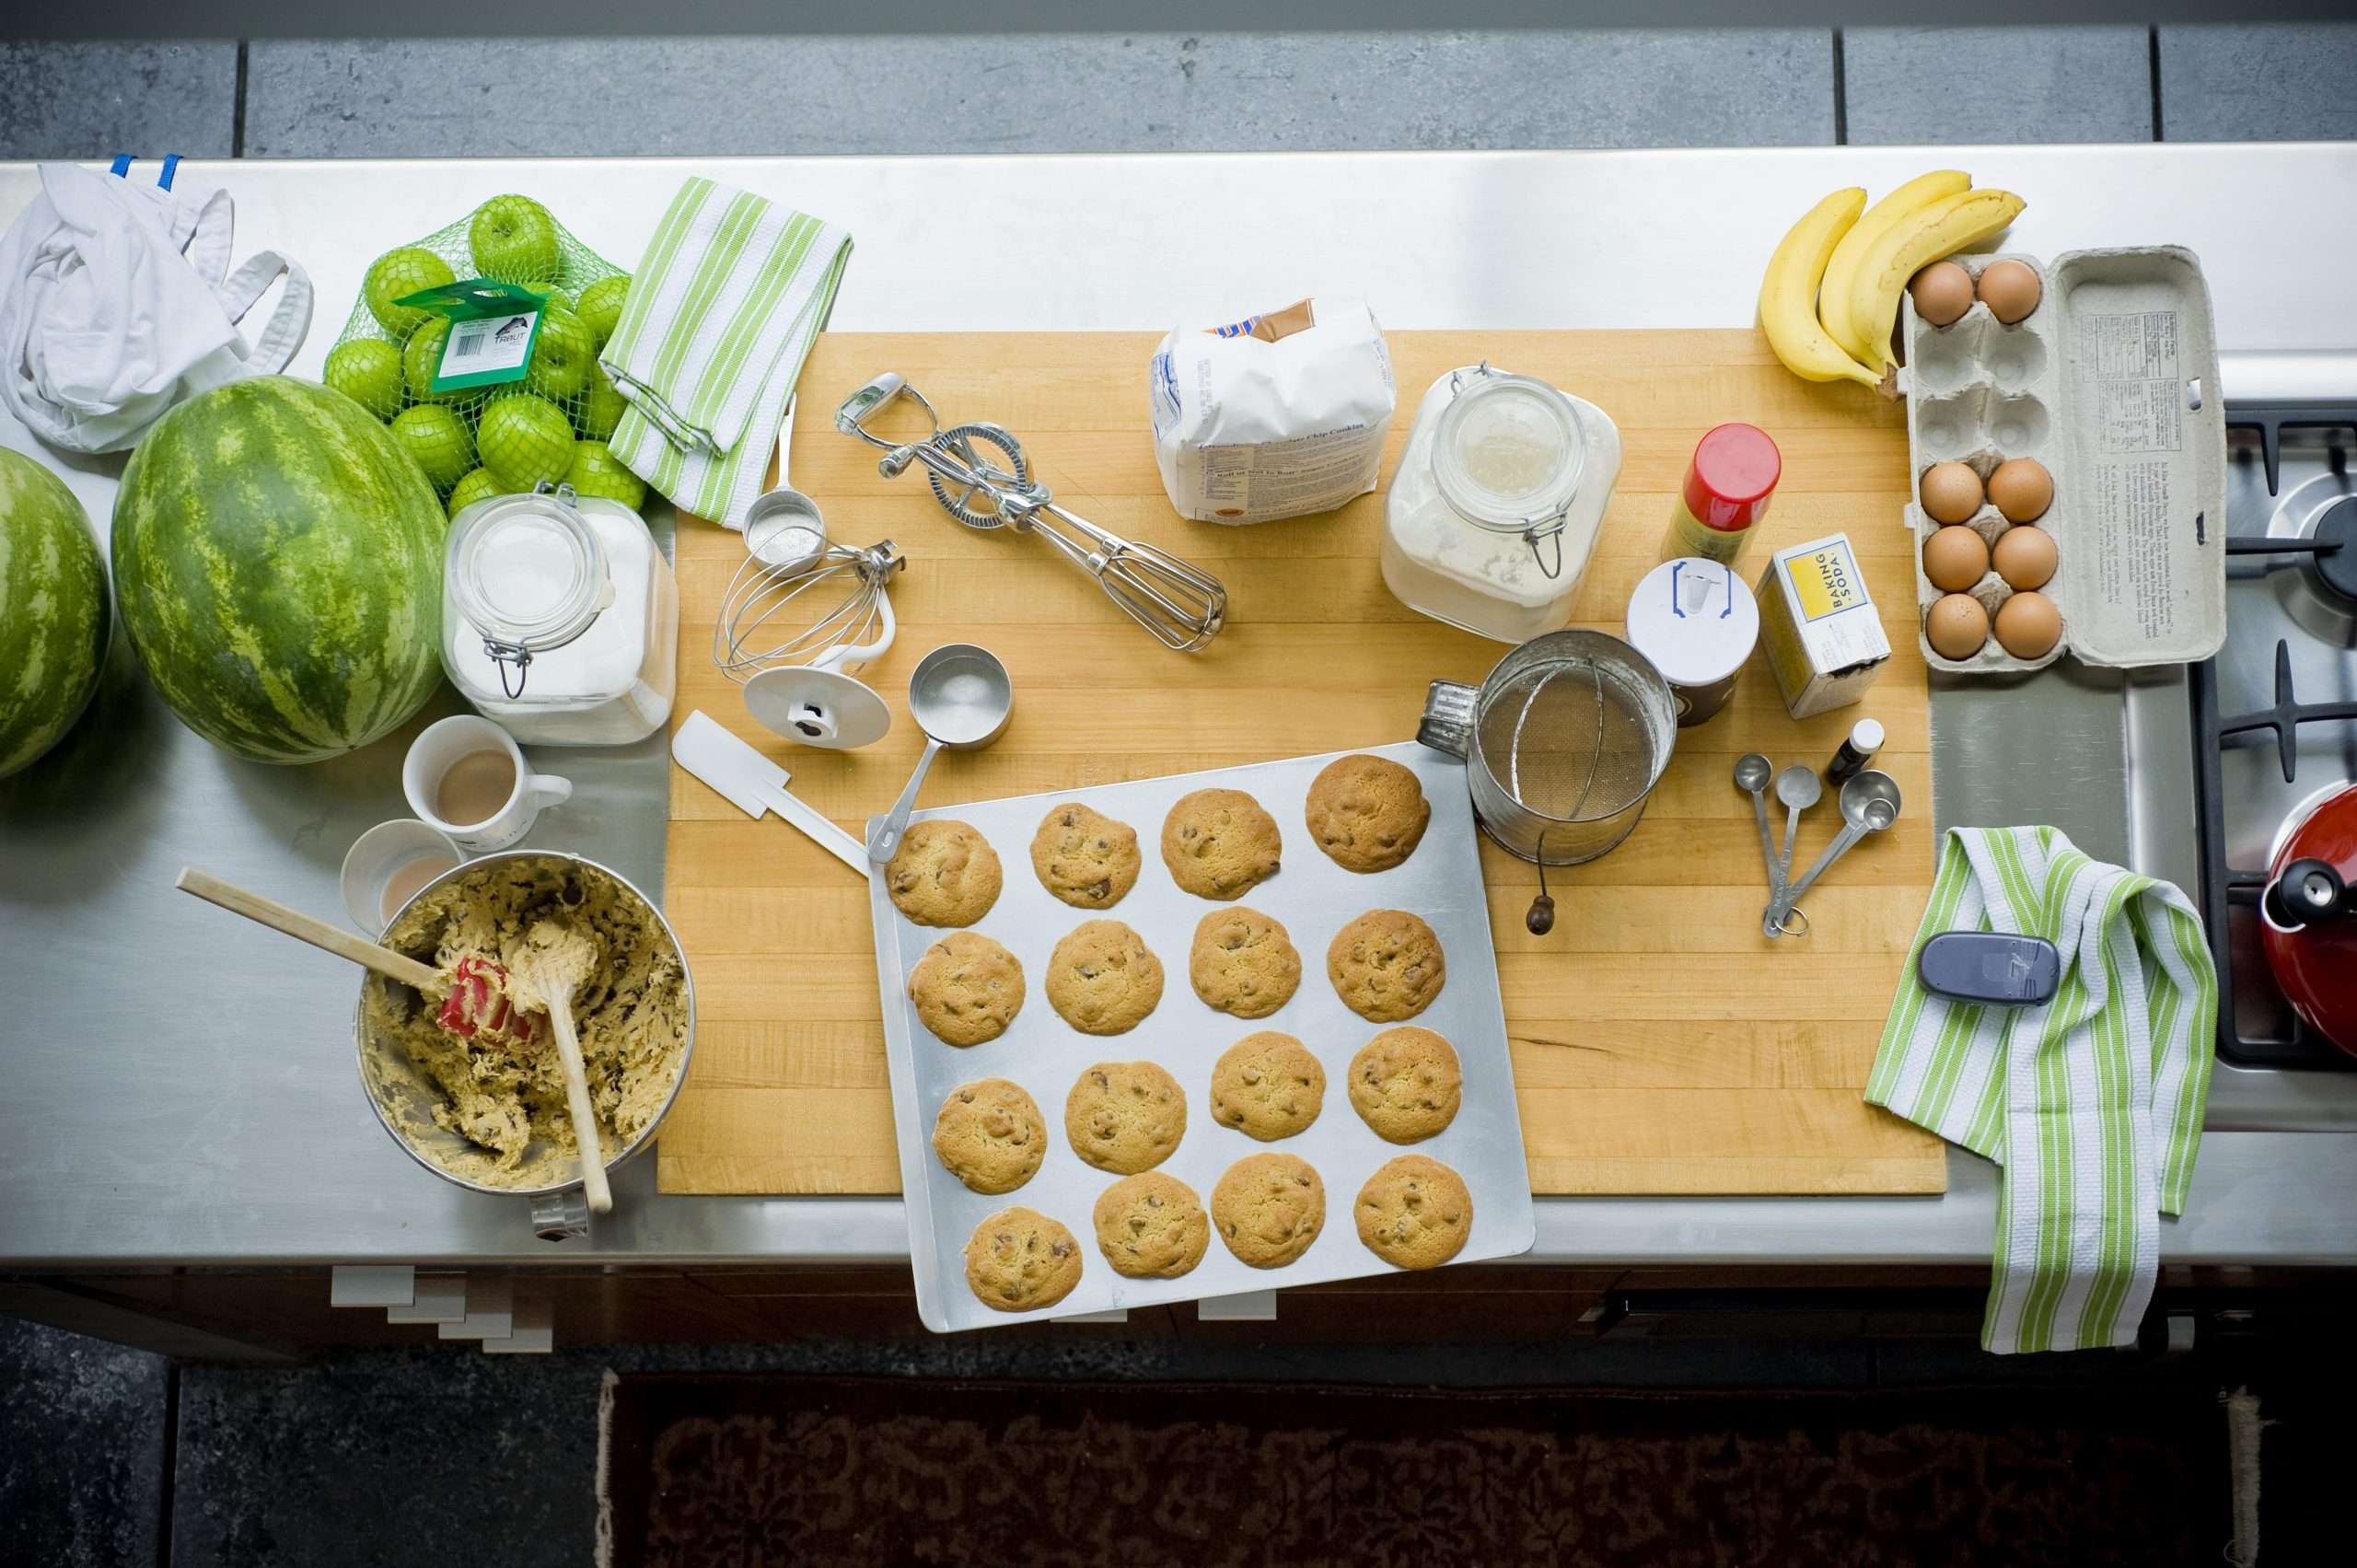 How to Start a Baking Business from Your Home